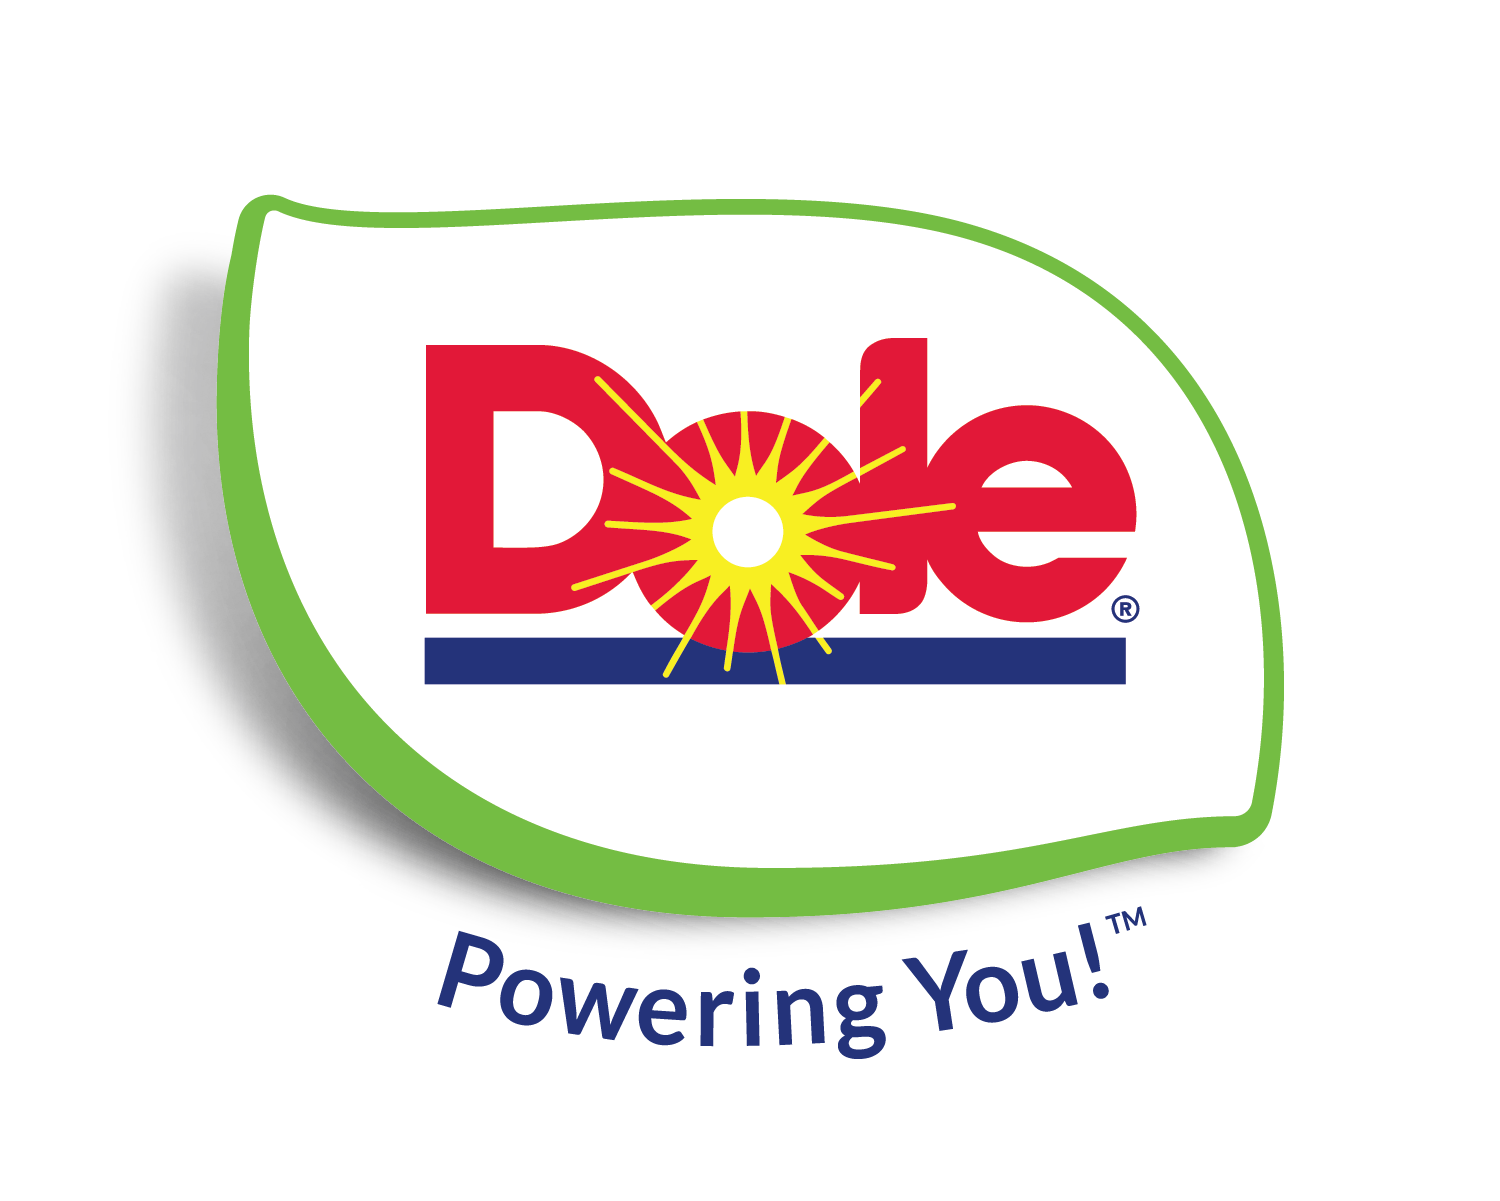 Dole Foods Logo_Powering You_Green Leaf with Shadow_PMS 368